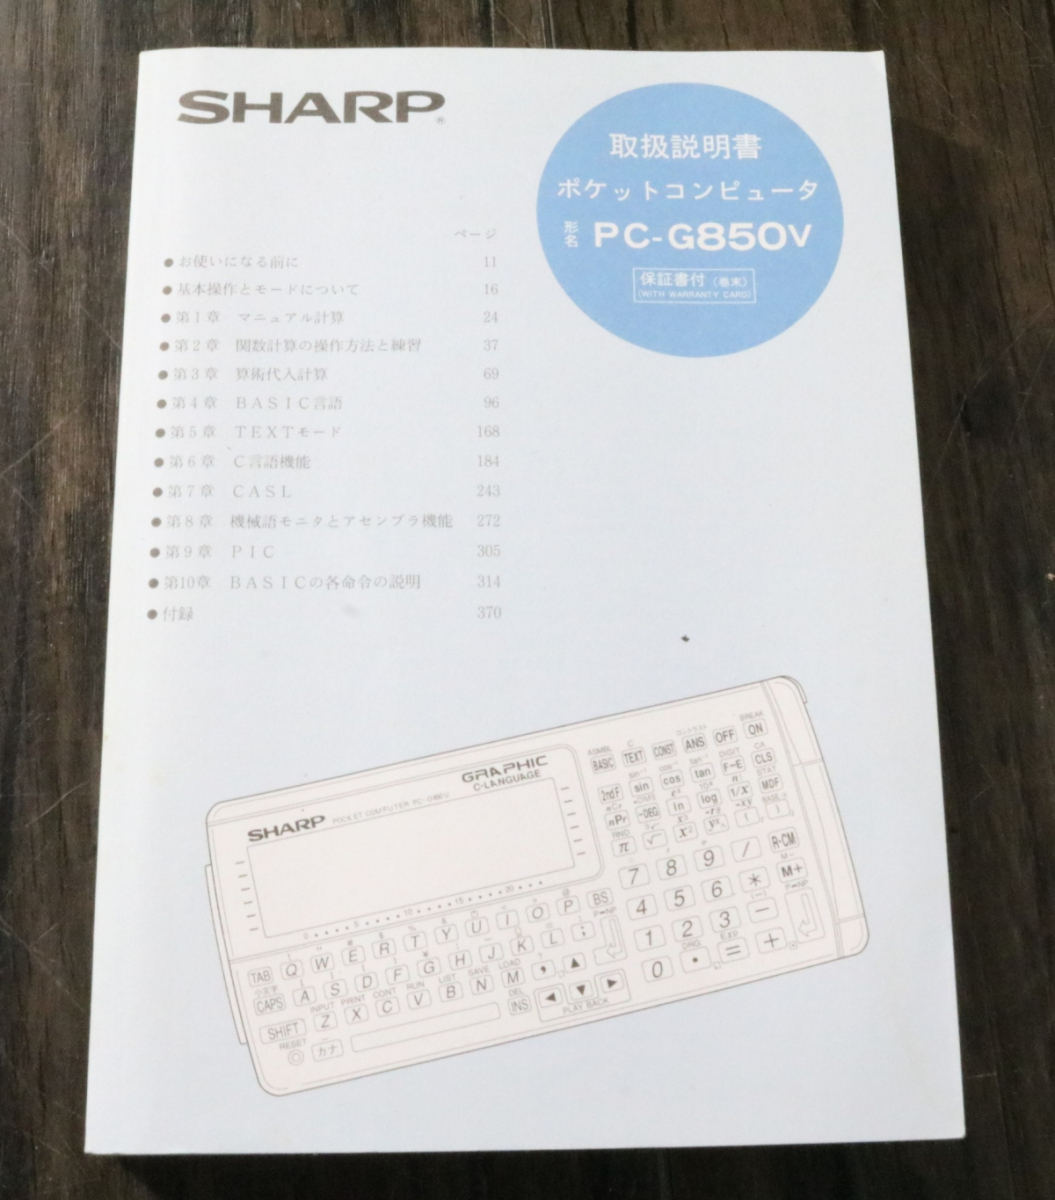 [to.]SHARP sharp GRAPHIC PC-G850V Pocket Computer pocket computer - manual box attaching school technology education exclusive use machine AC687DEW29